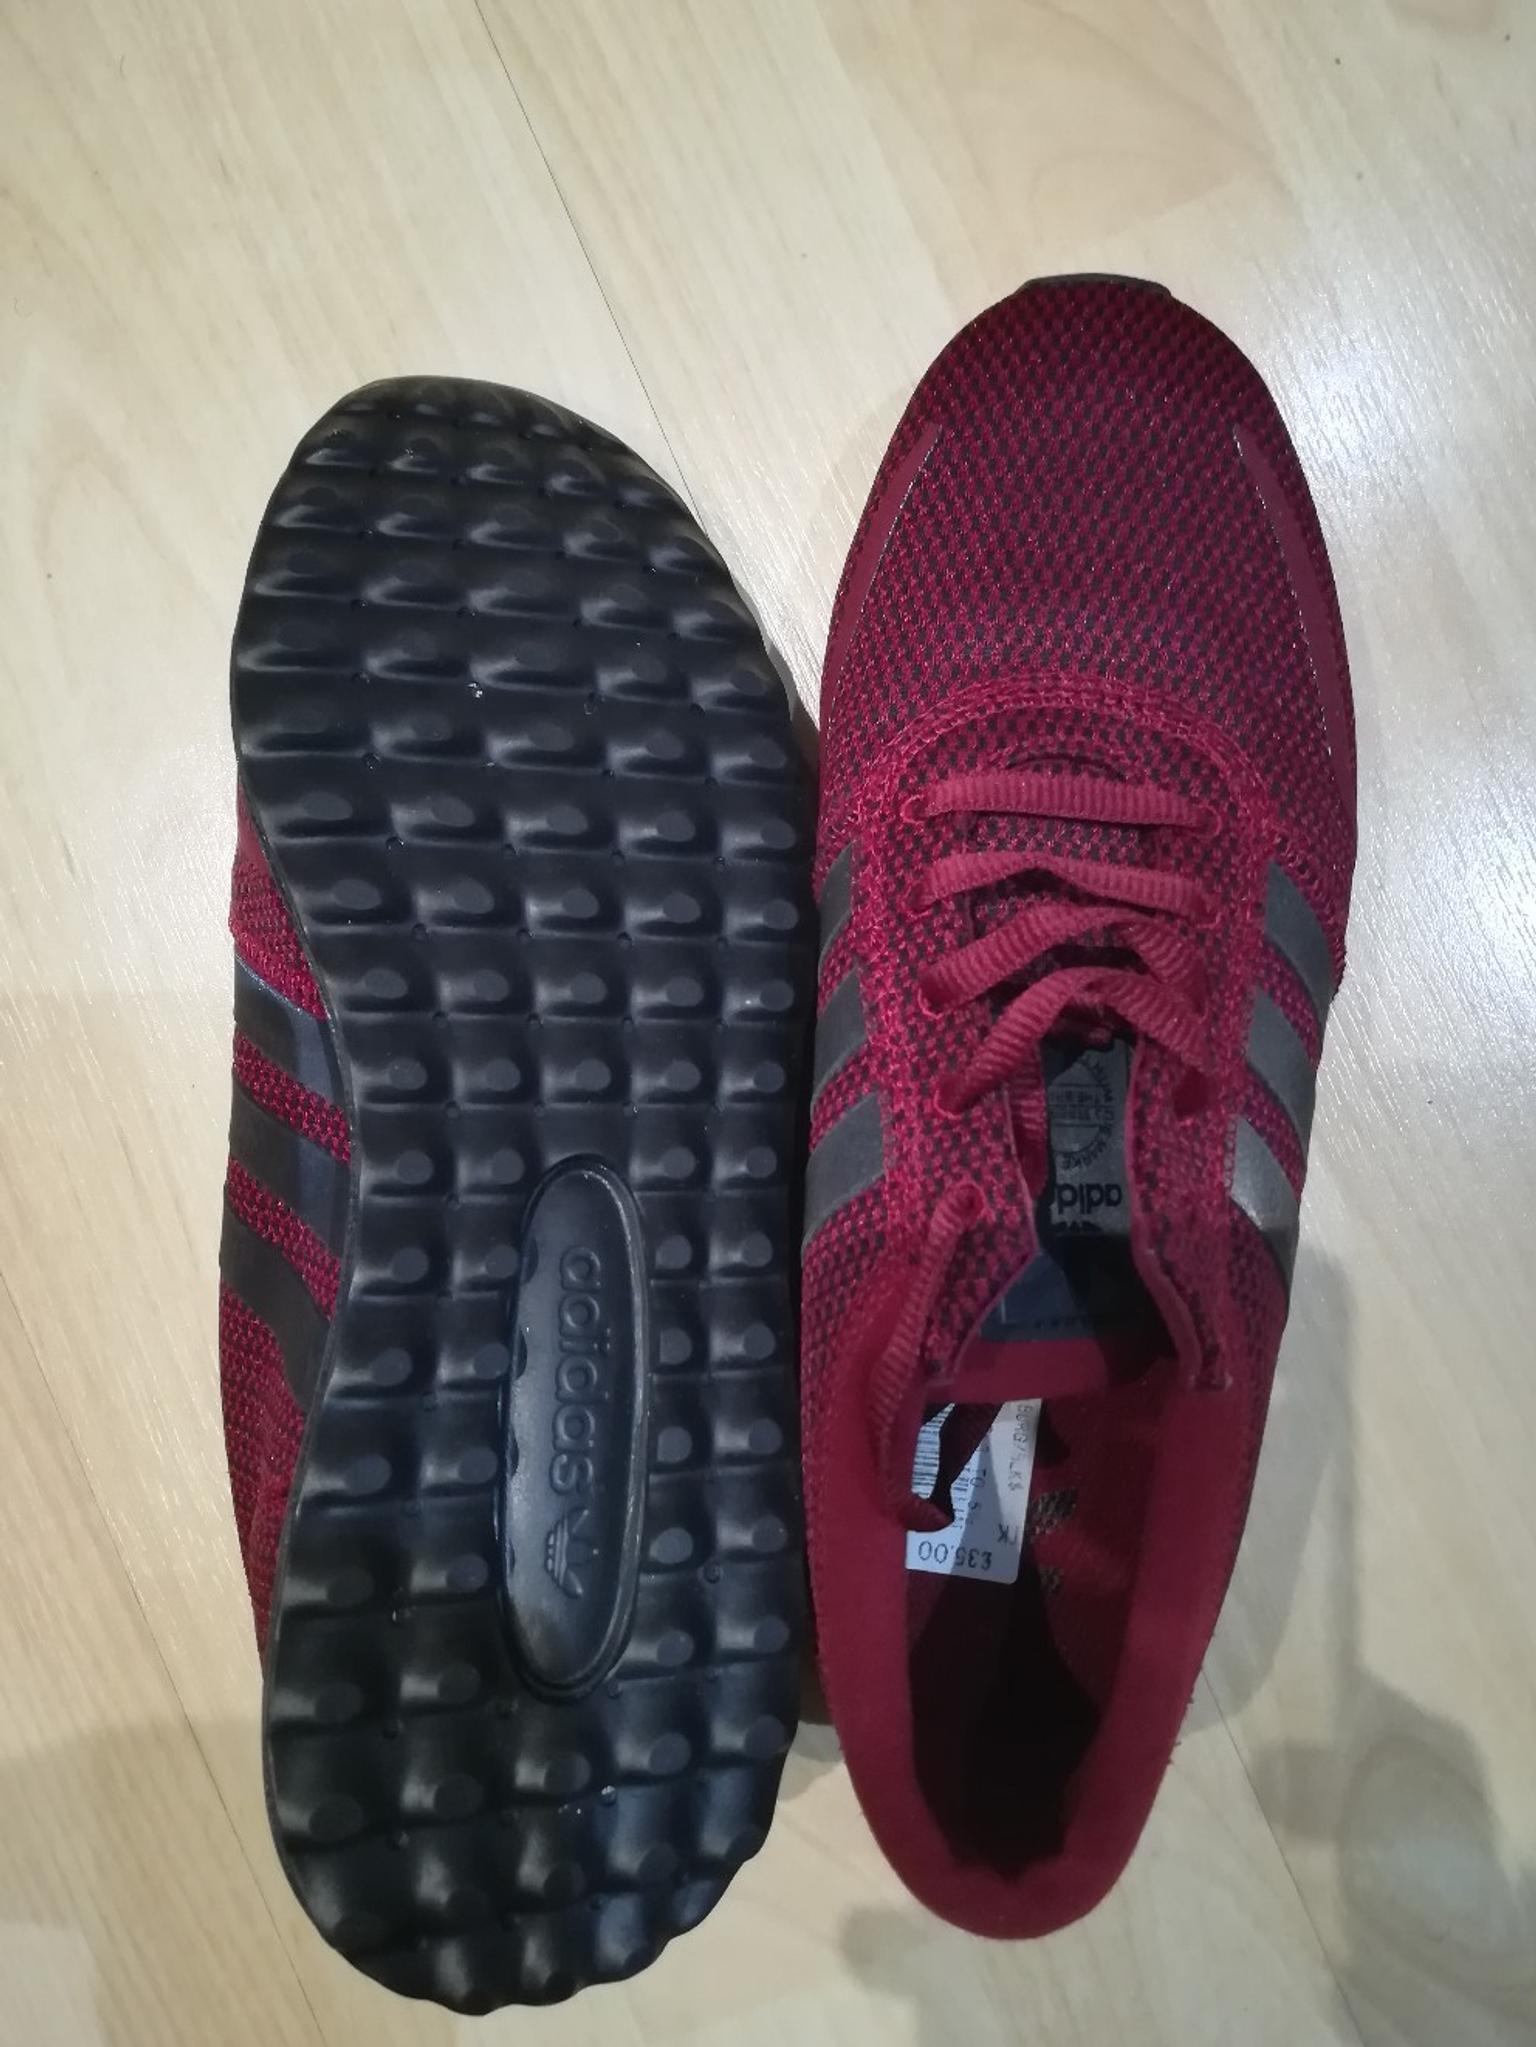 Brand new Adidas ortholite trainer in 